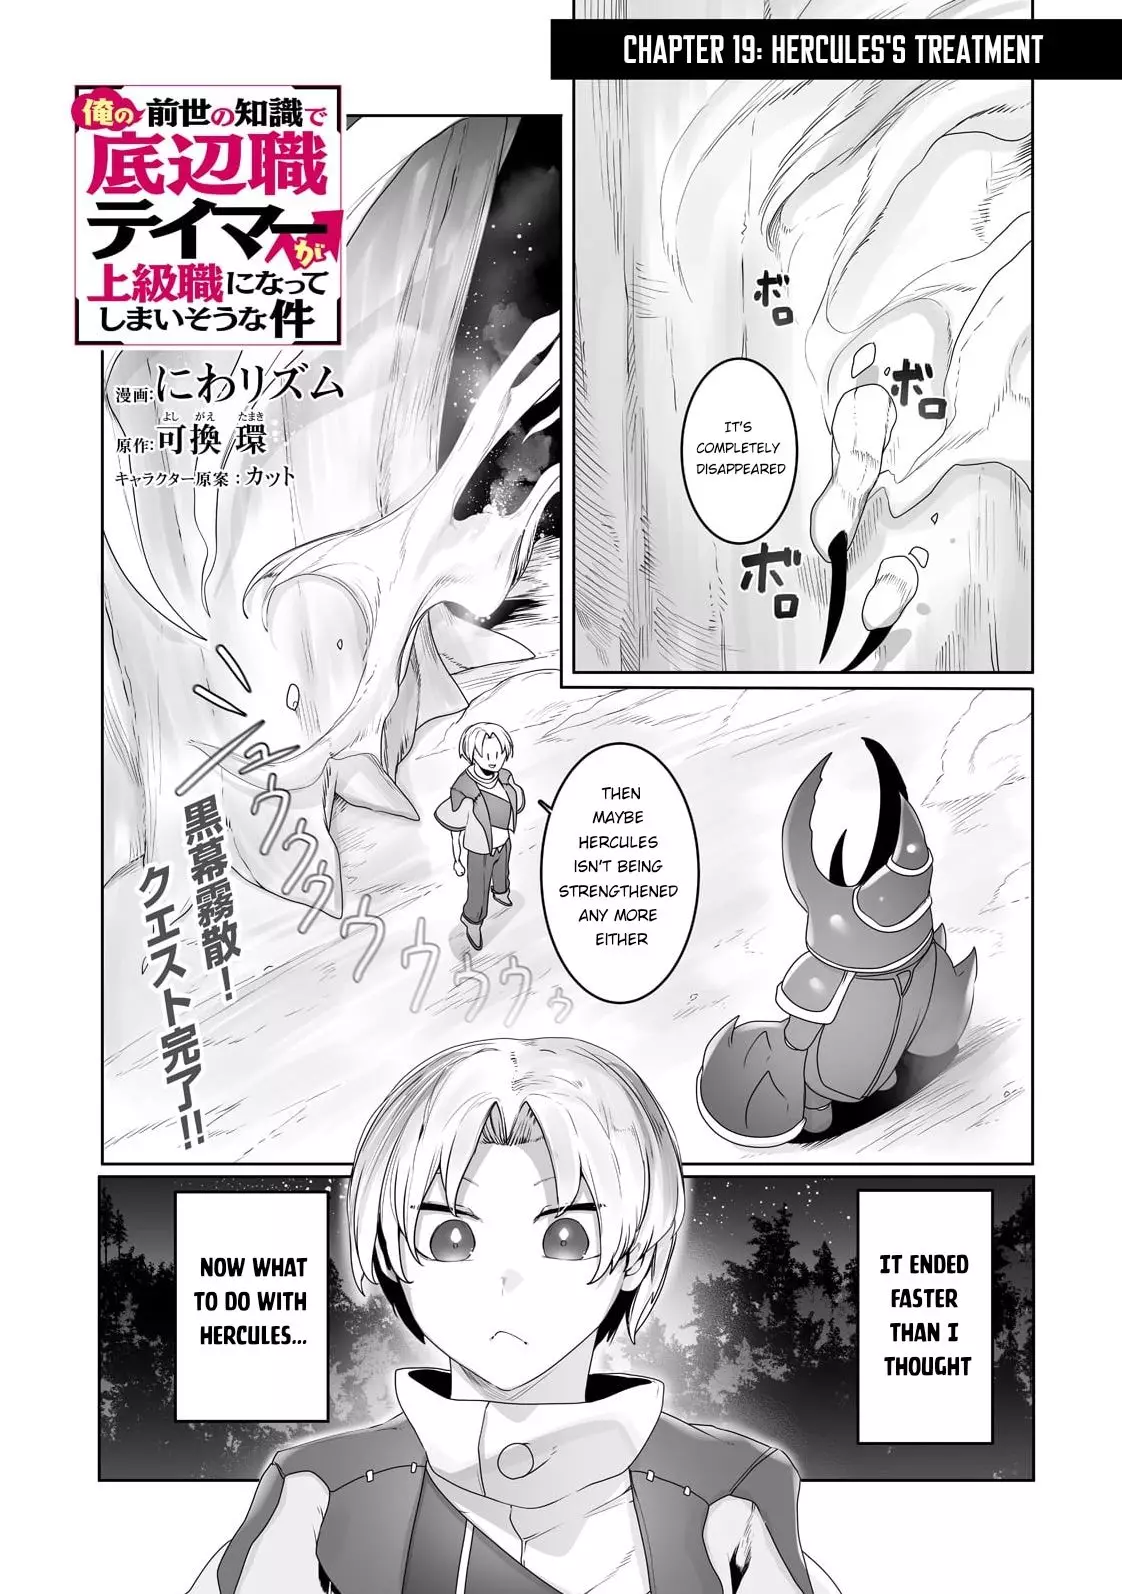 The Useless Tamer Will Turn Into The Top Unconsciously By My Previous Life Knowledge - 19 page 2-9c32cb6c